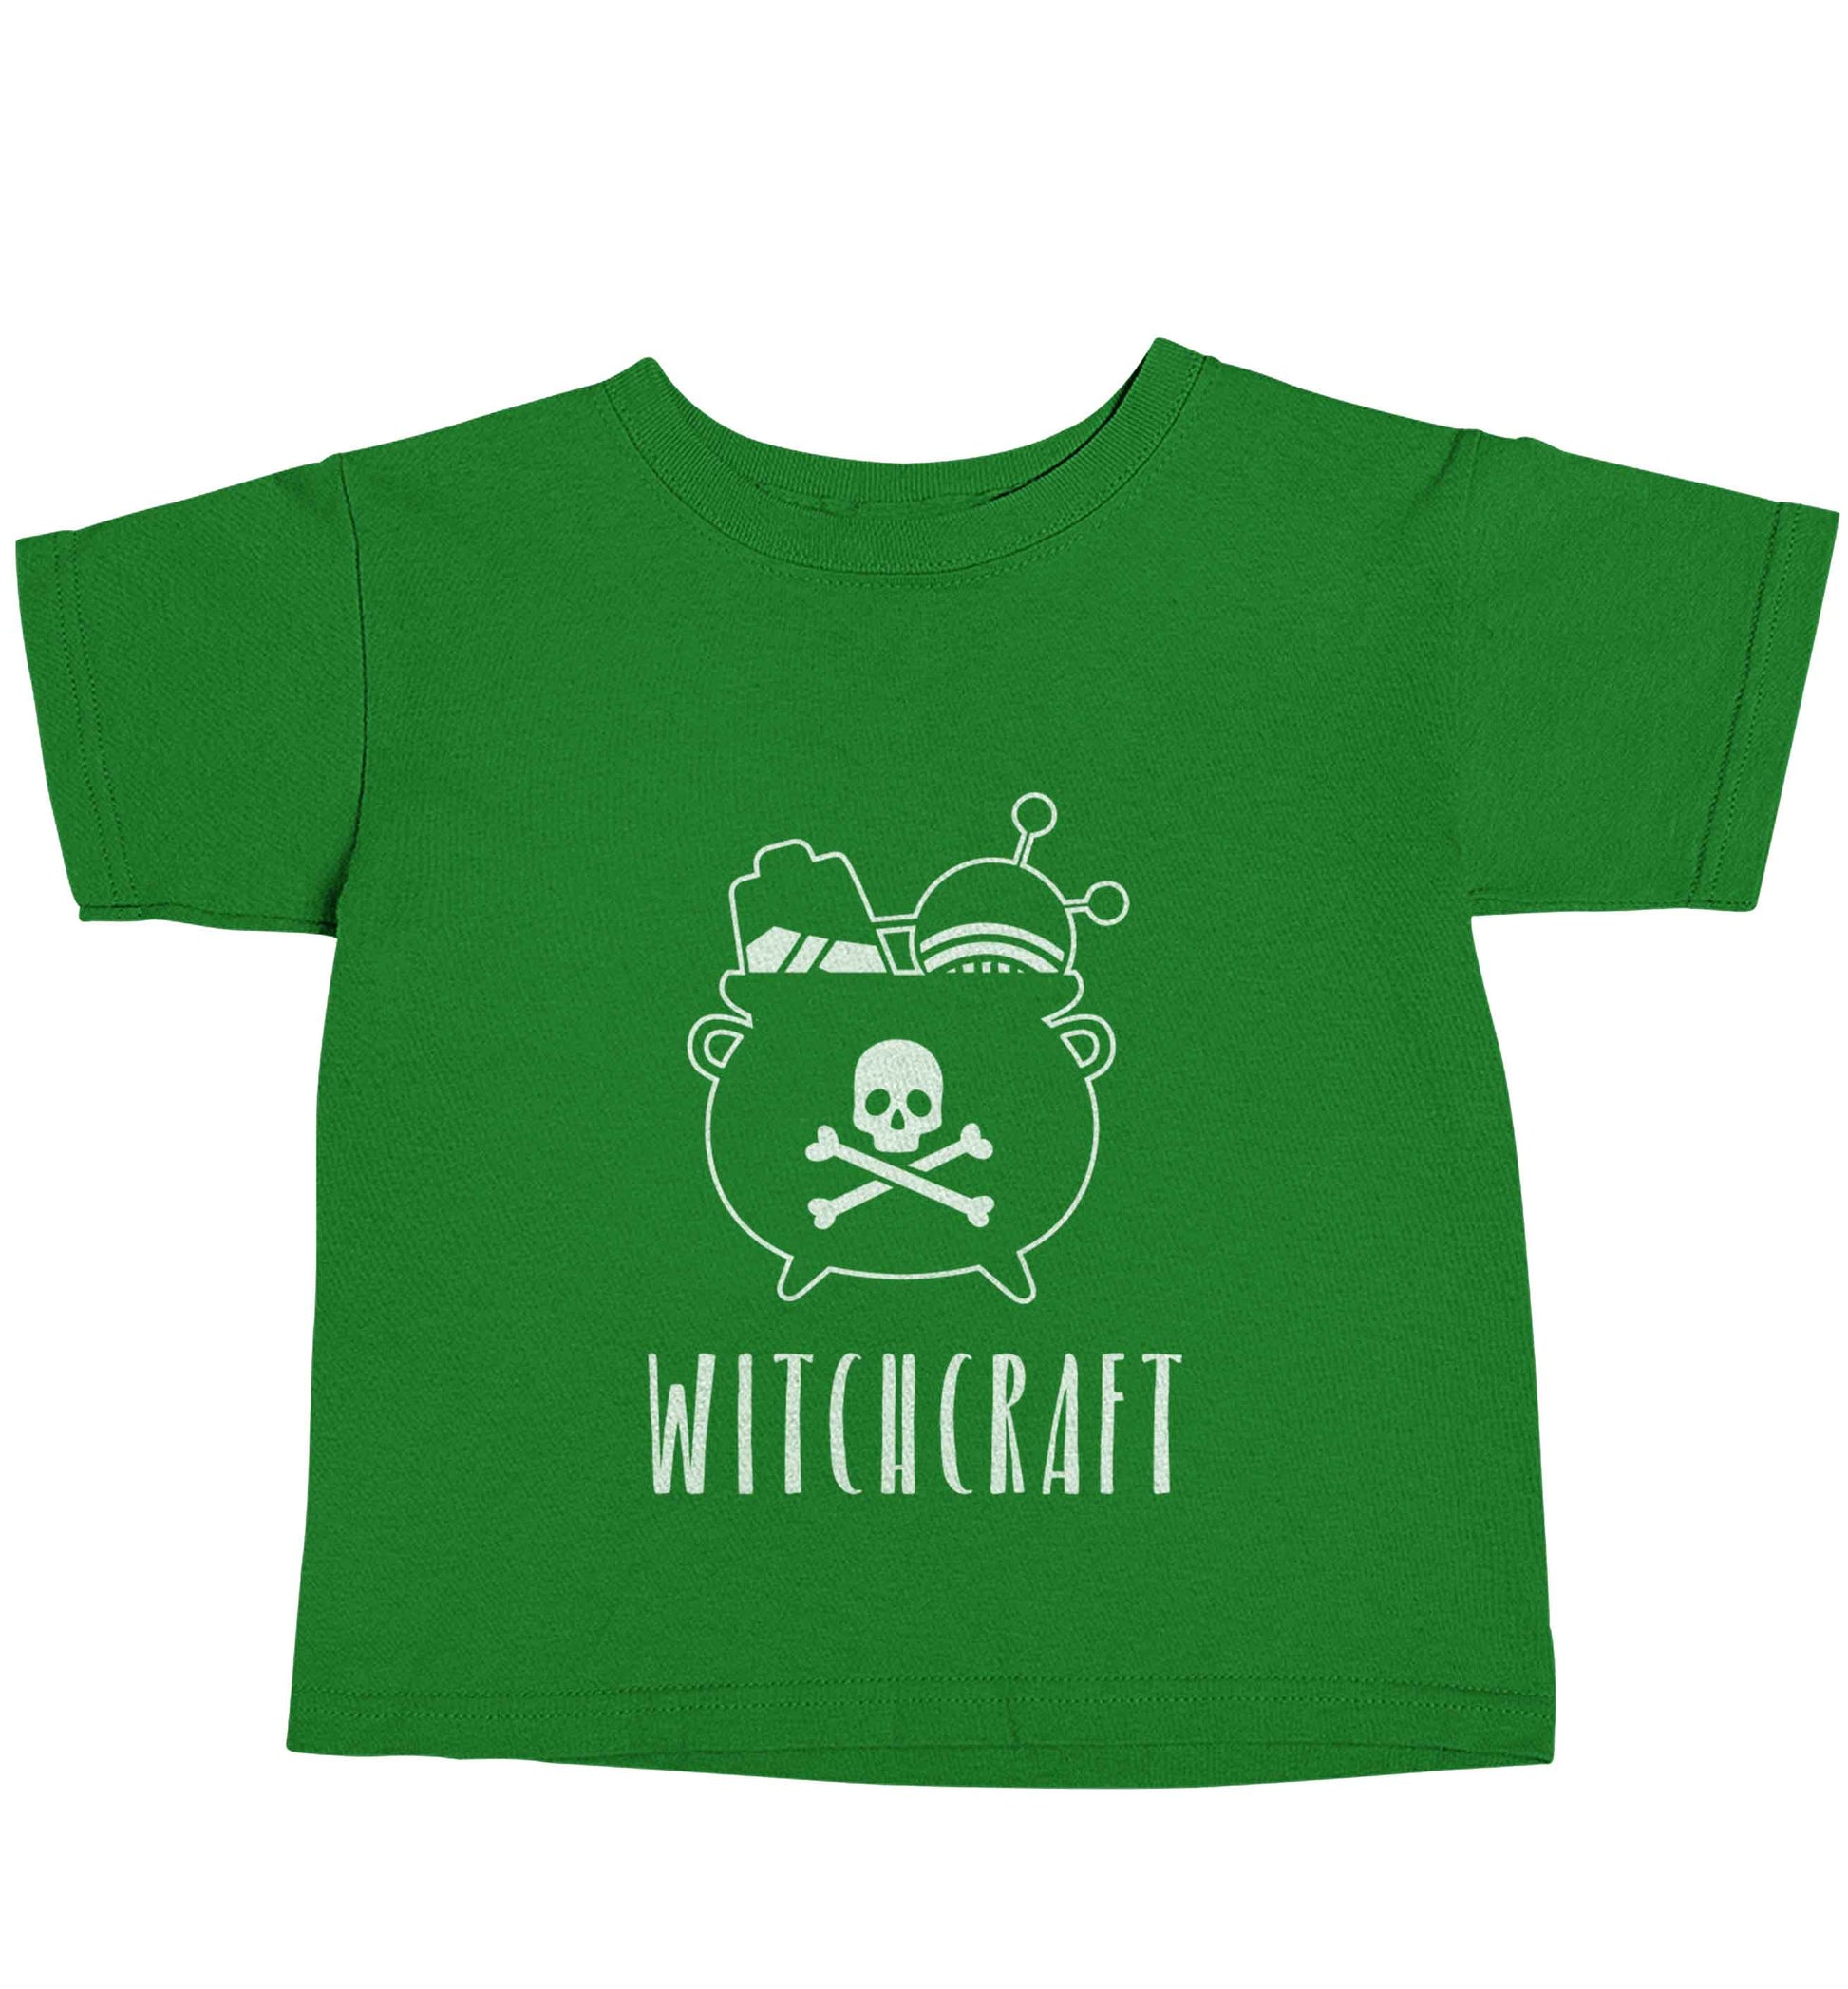 Witchcraft green baby toddler Tshirt 2 Years